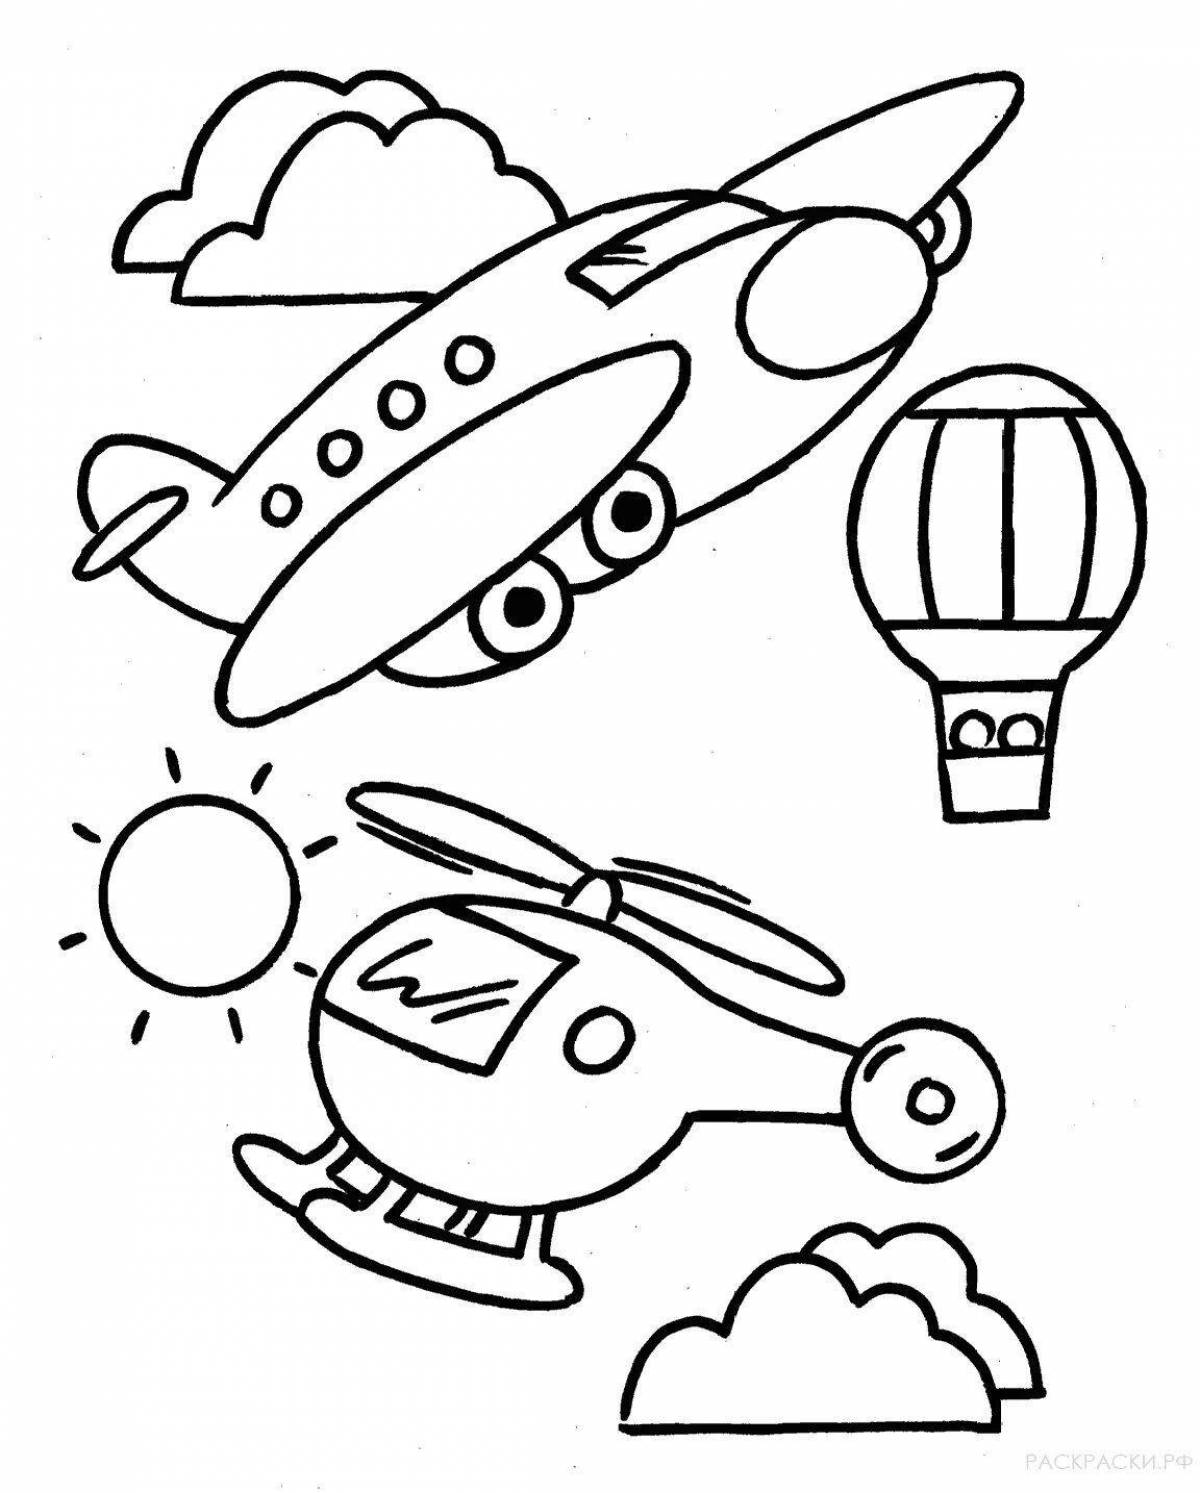 Cute air transport coloring book for 6-7 year olds